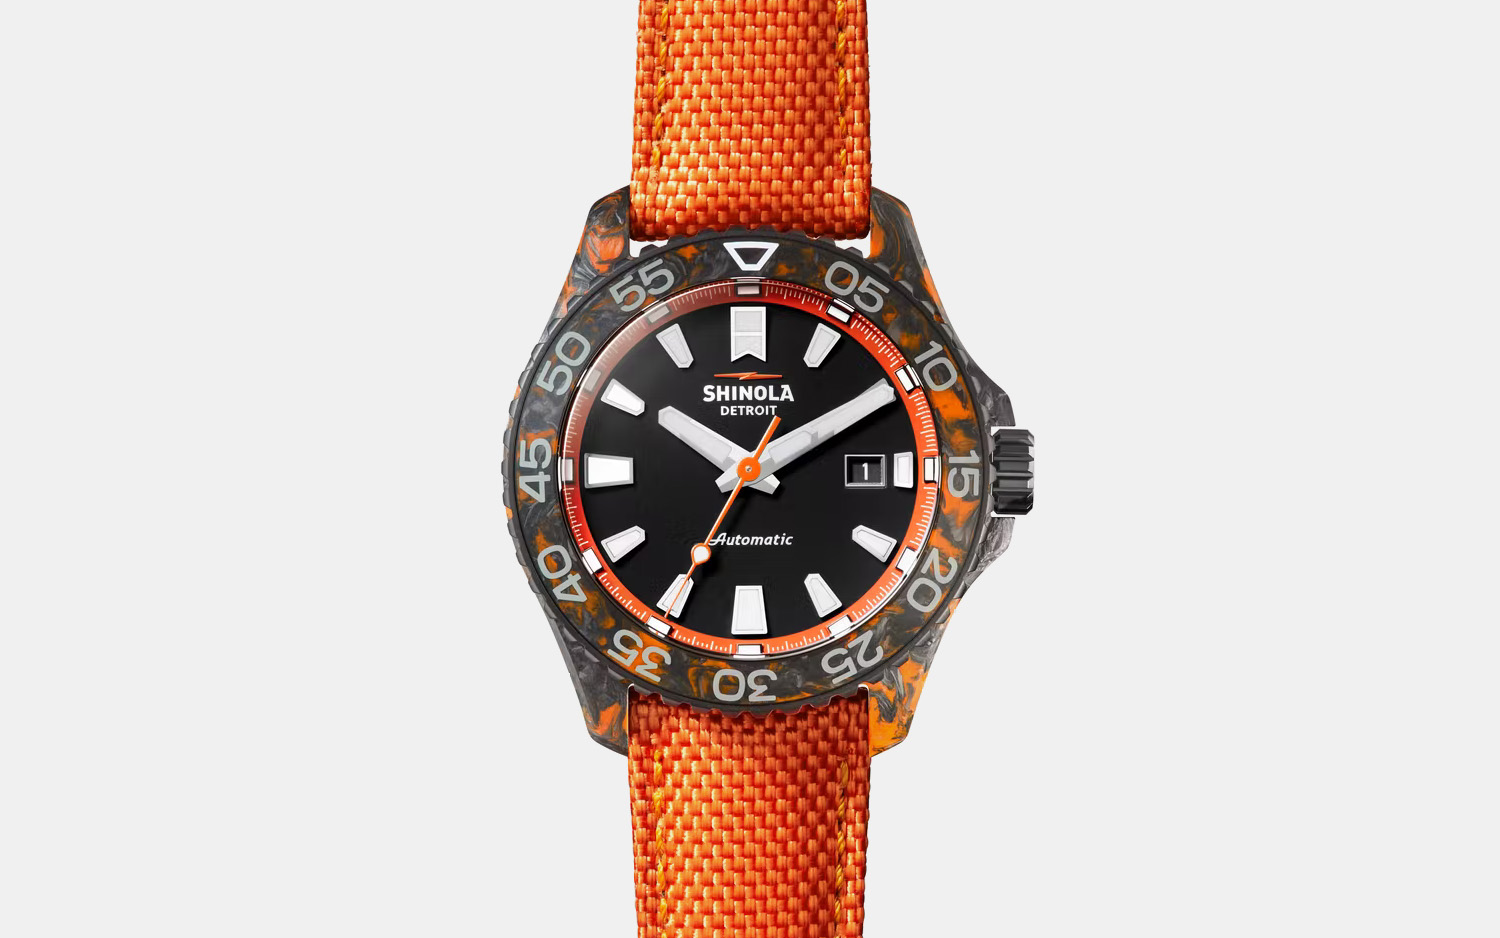 Shinola Forged Carbon Monster Automatic Dive Watch